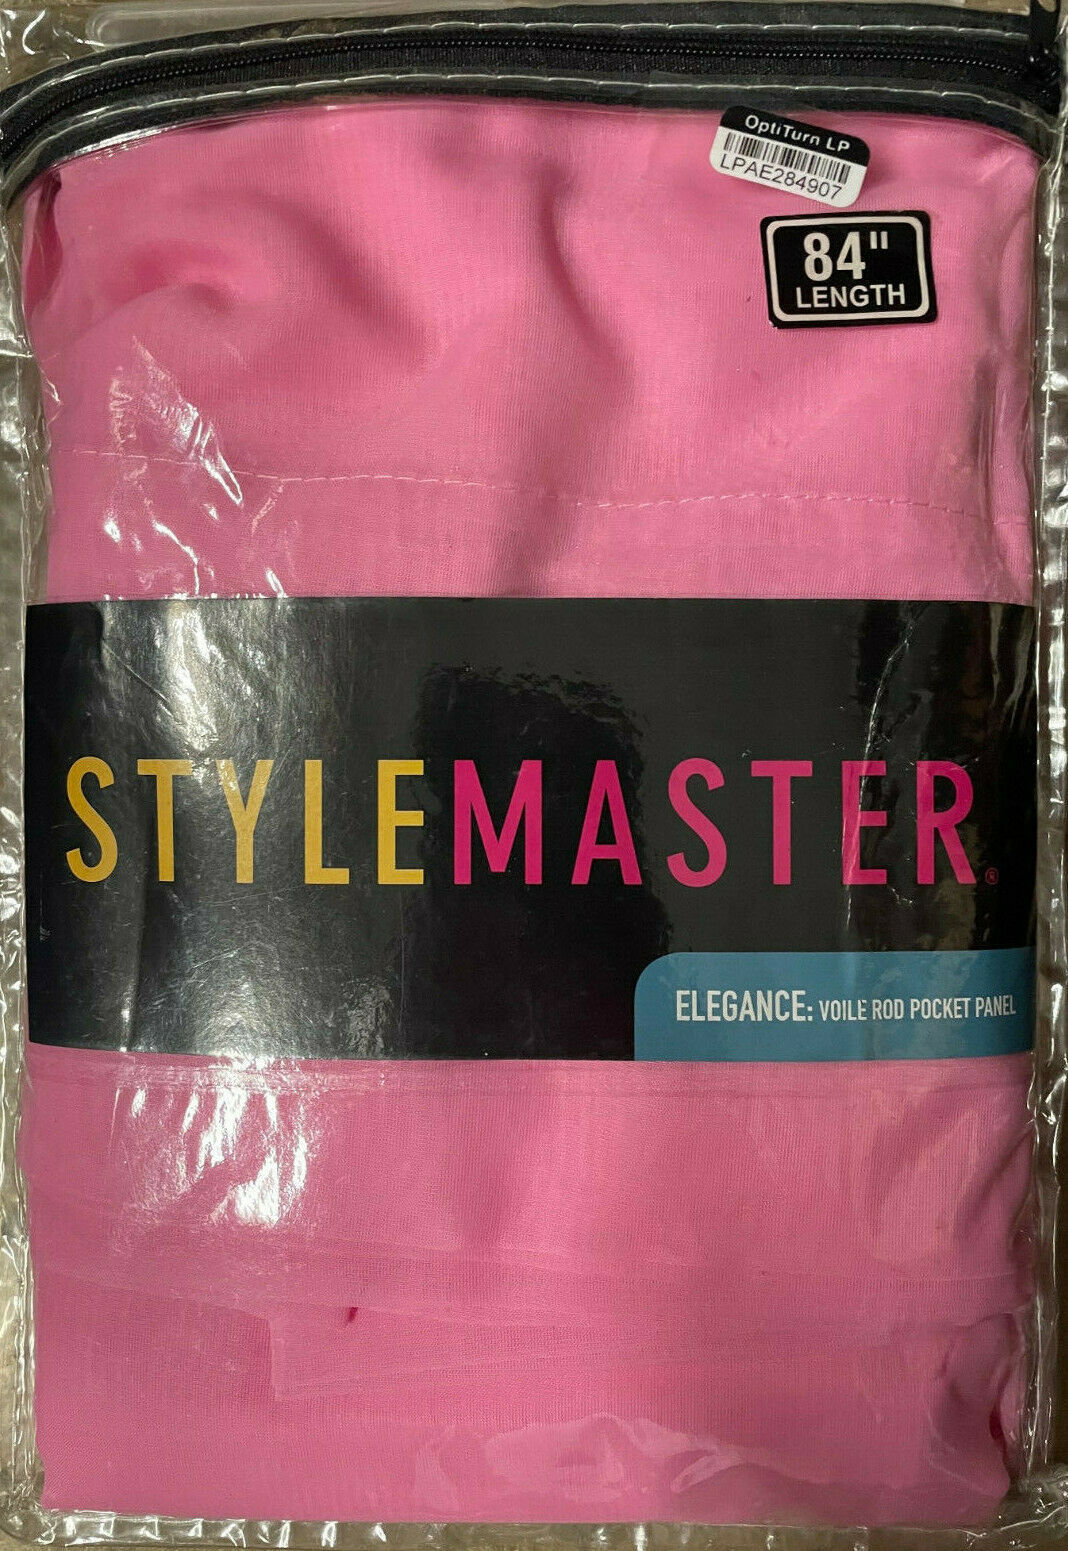 NWT's Stylemaster Elegance Voile Rod Pocket Panel, 60 By 84-inch,1 pc -Pink - $12.99